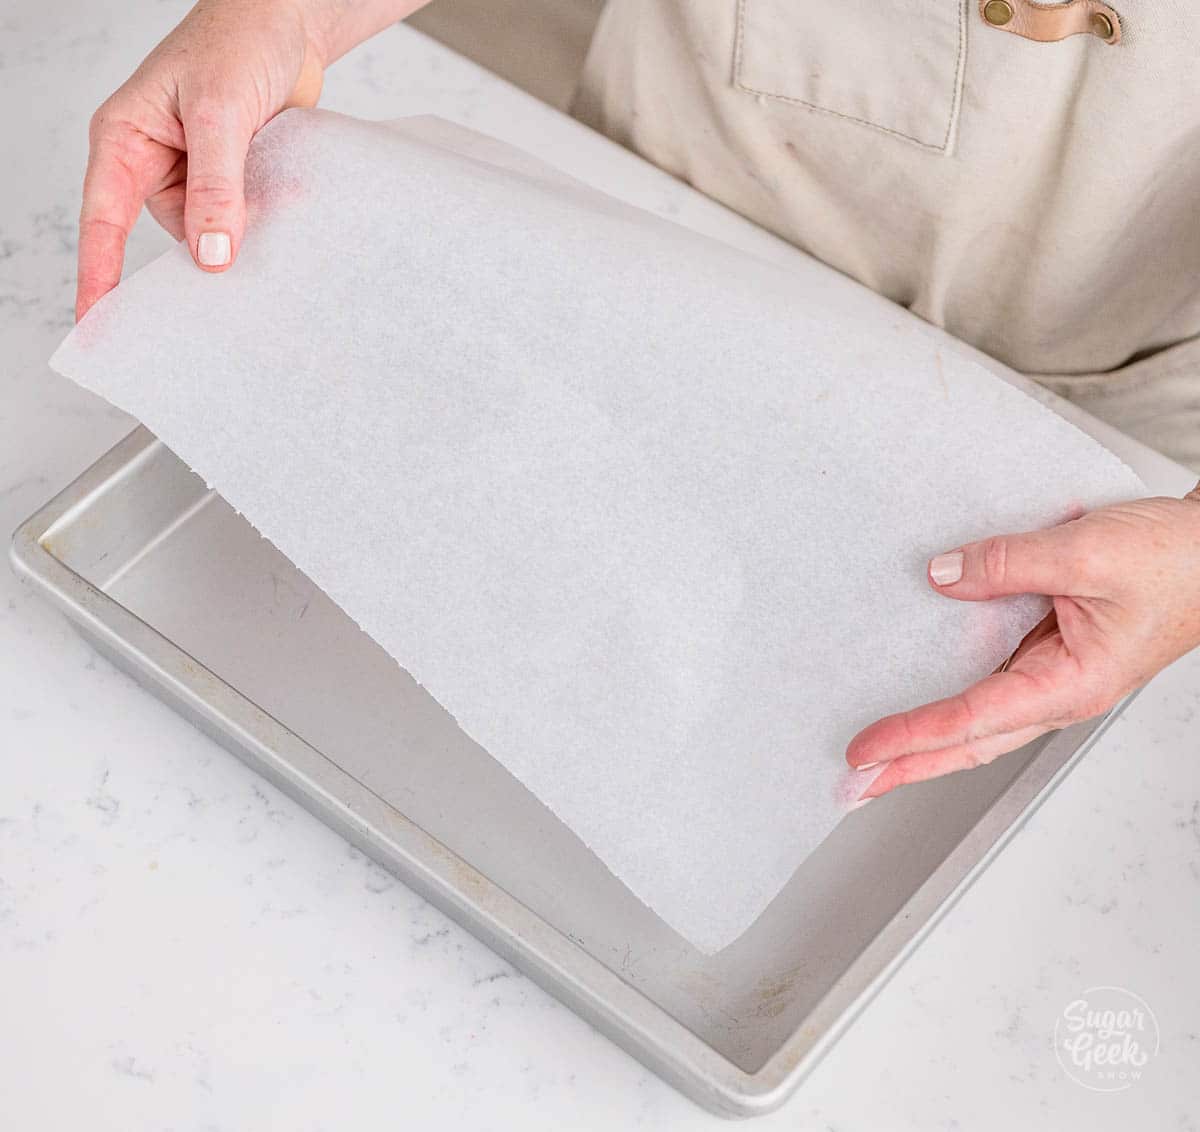 hands placing a sheet of parchment paper into a 9x12 sheet pan